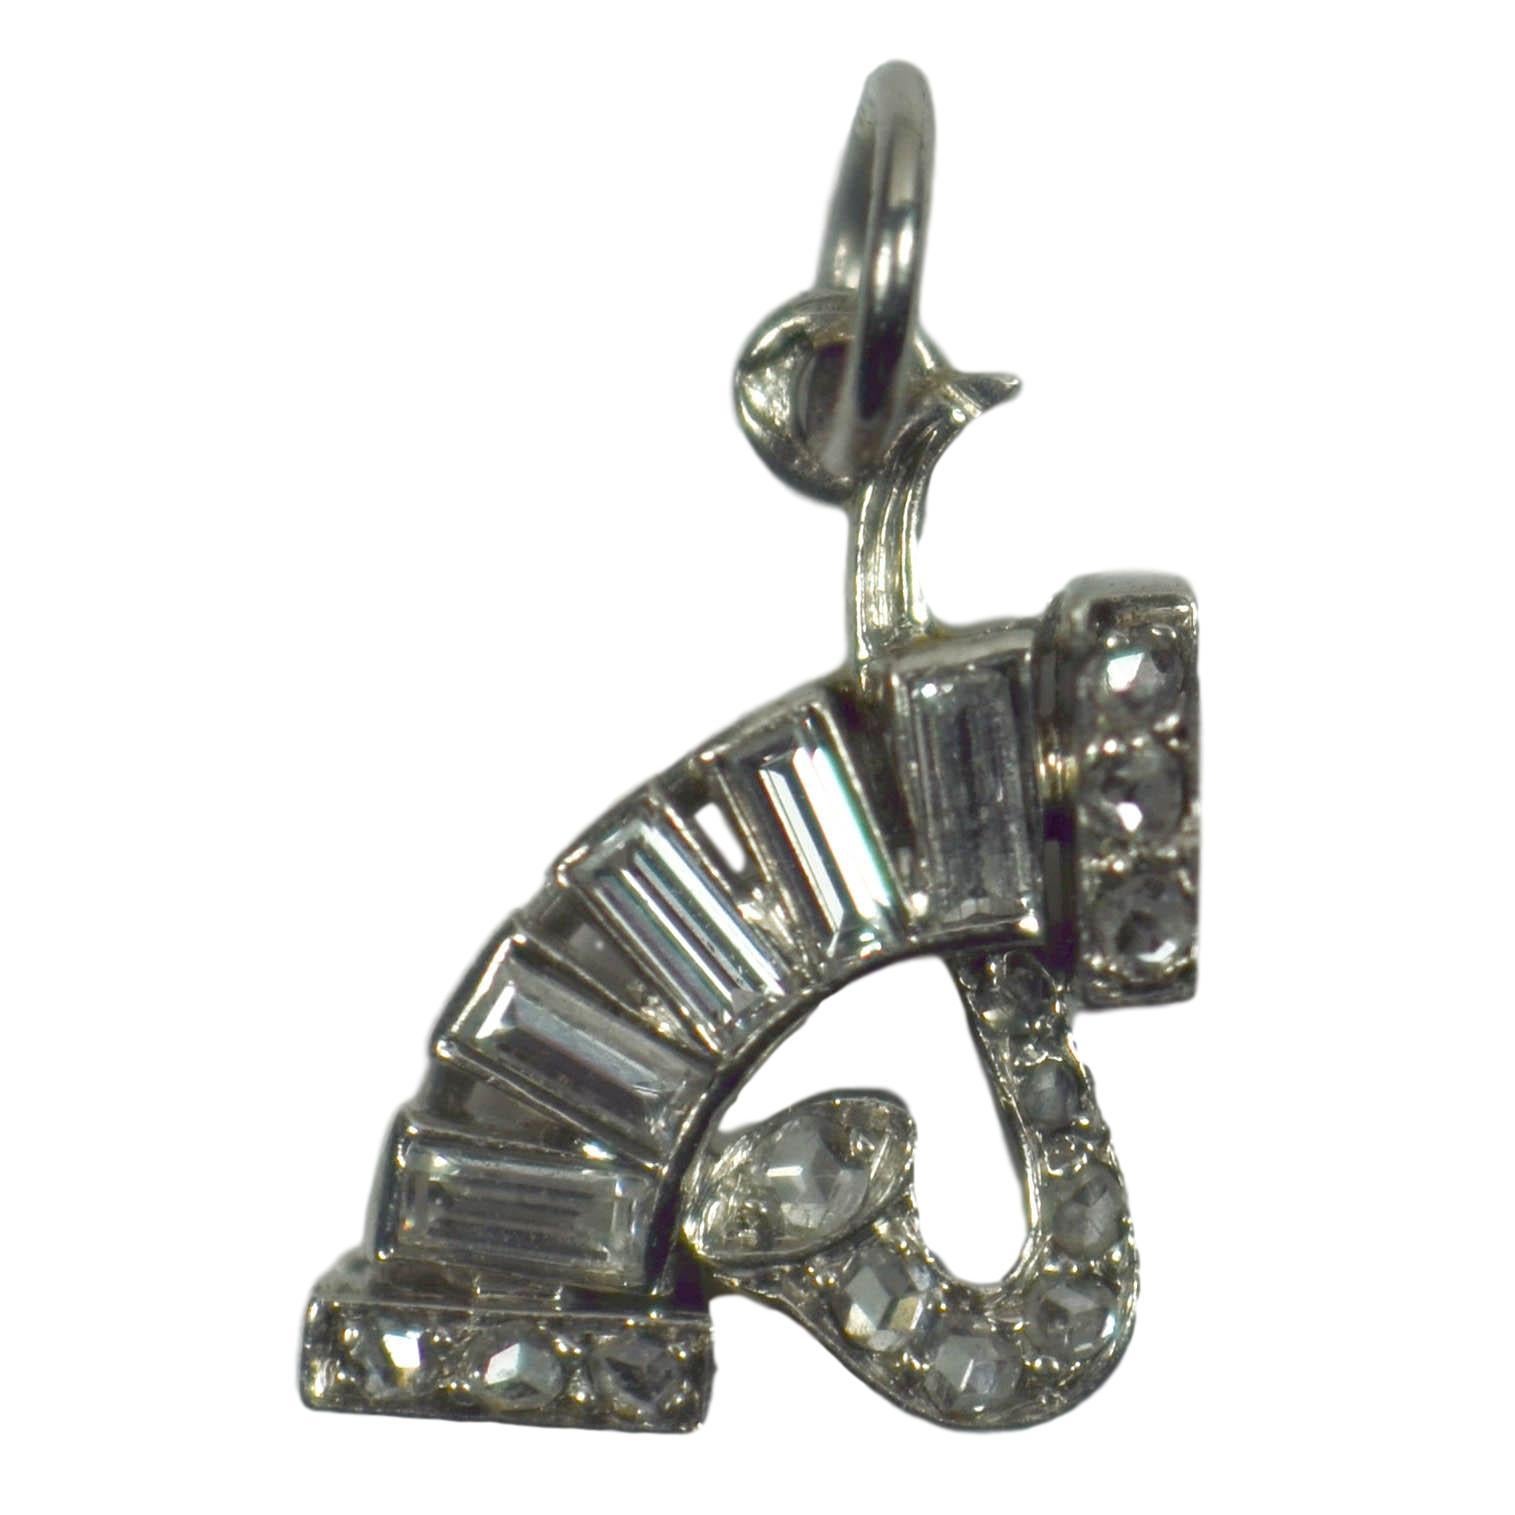 An Art Deco platinum and diamond charm designed as a saxophone and accordion, possibly by Chaumet. Set with five baguette-cut diamonds and 13 rose-cut diamonds with a total approximate weight of 0.55 carats.

Stamped with the dogs head for platinum